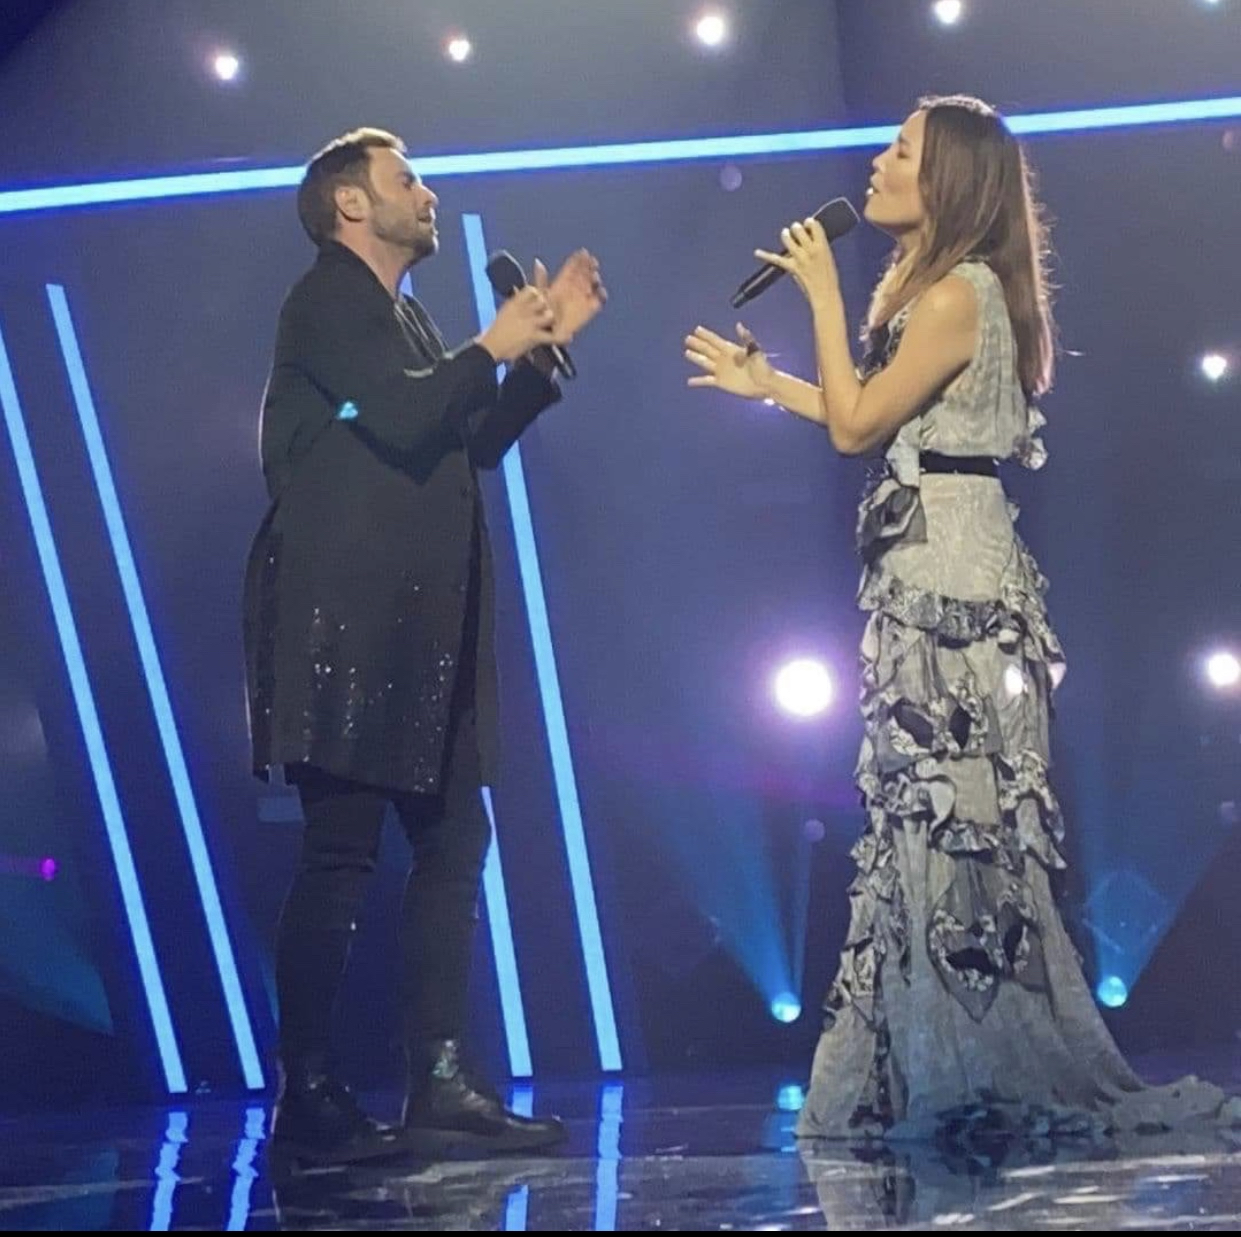 Dami Im performs the new duet single with Eurovision Star Måns Zelmerlöw live